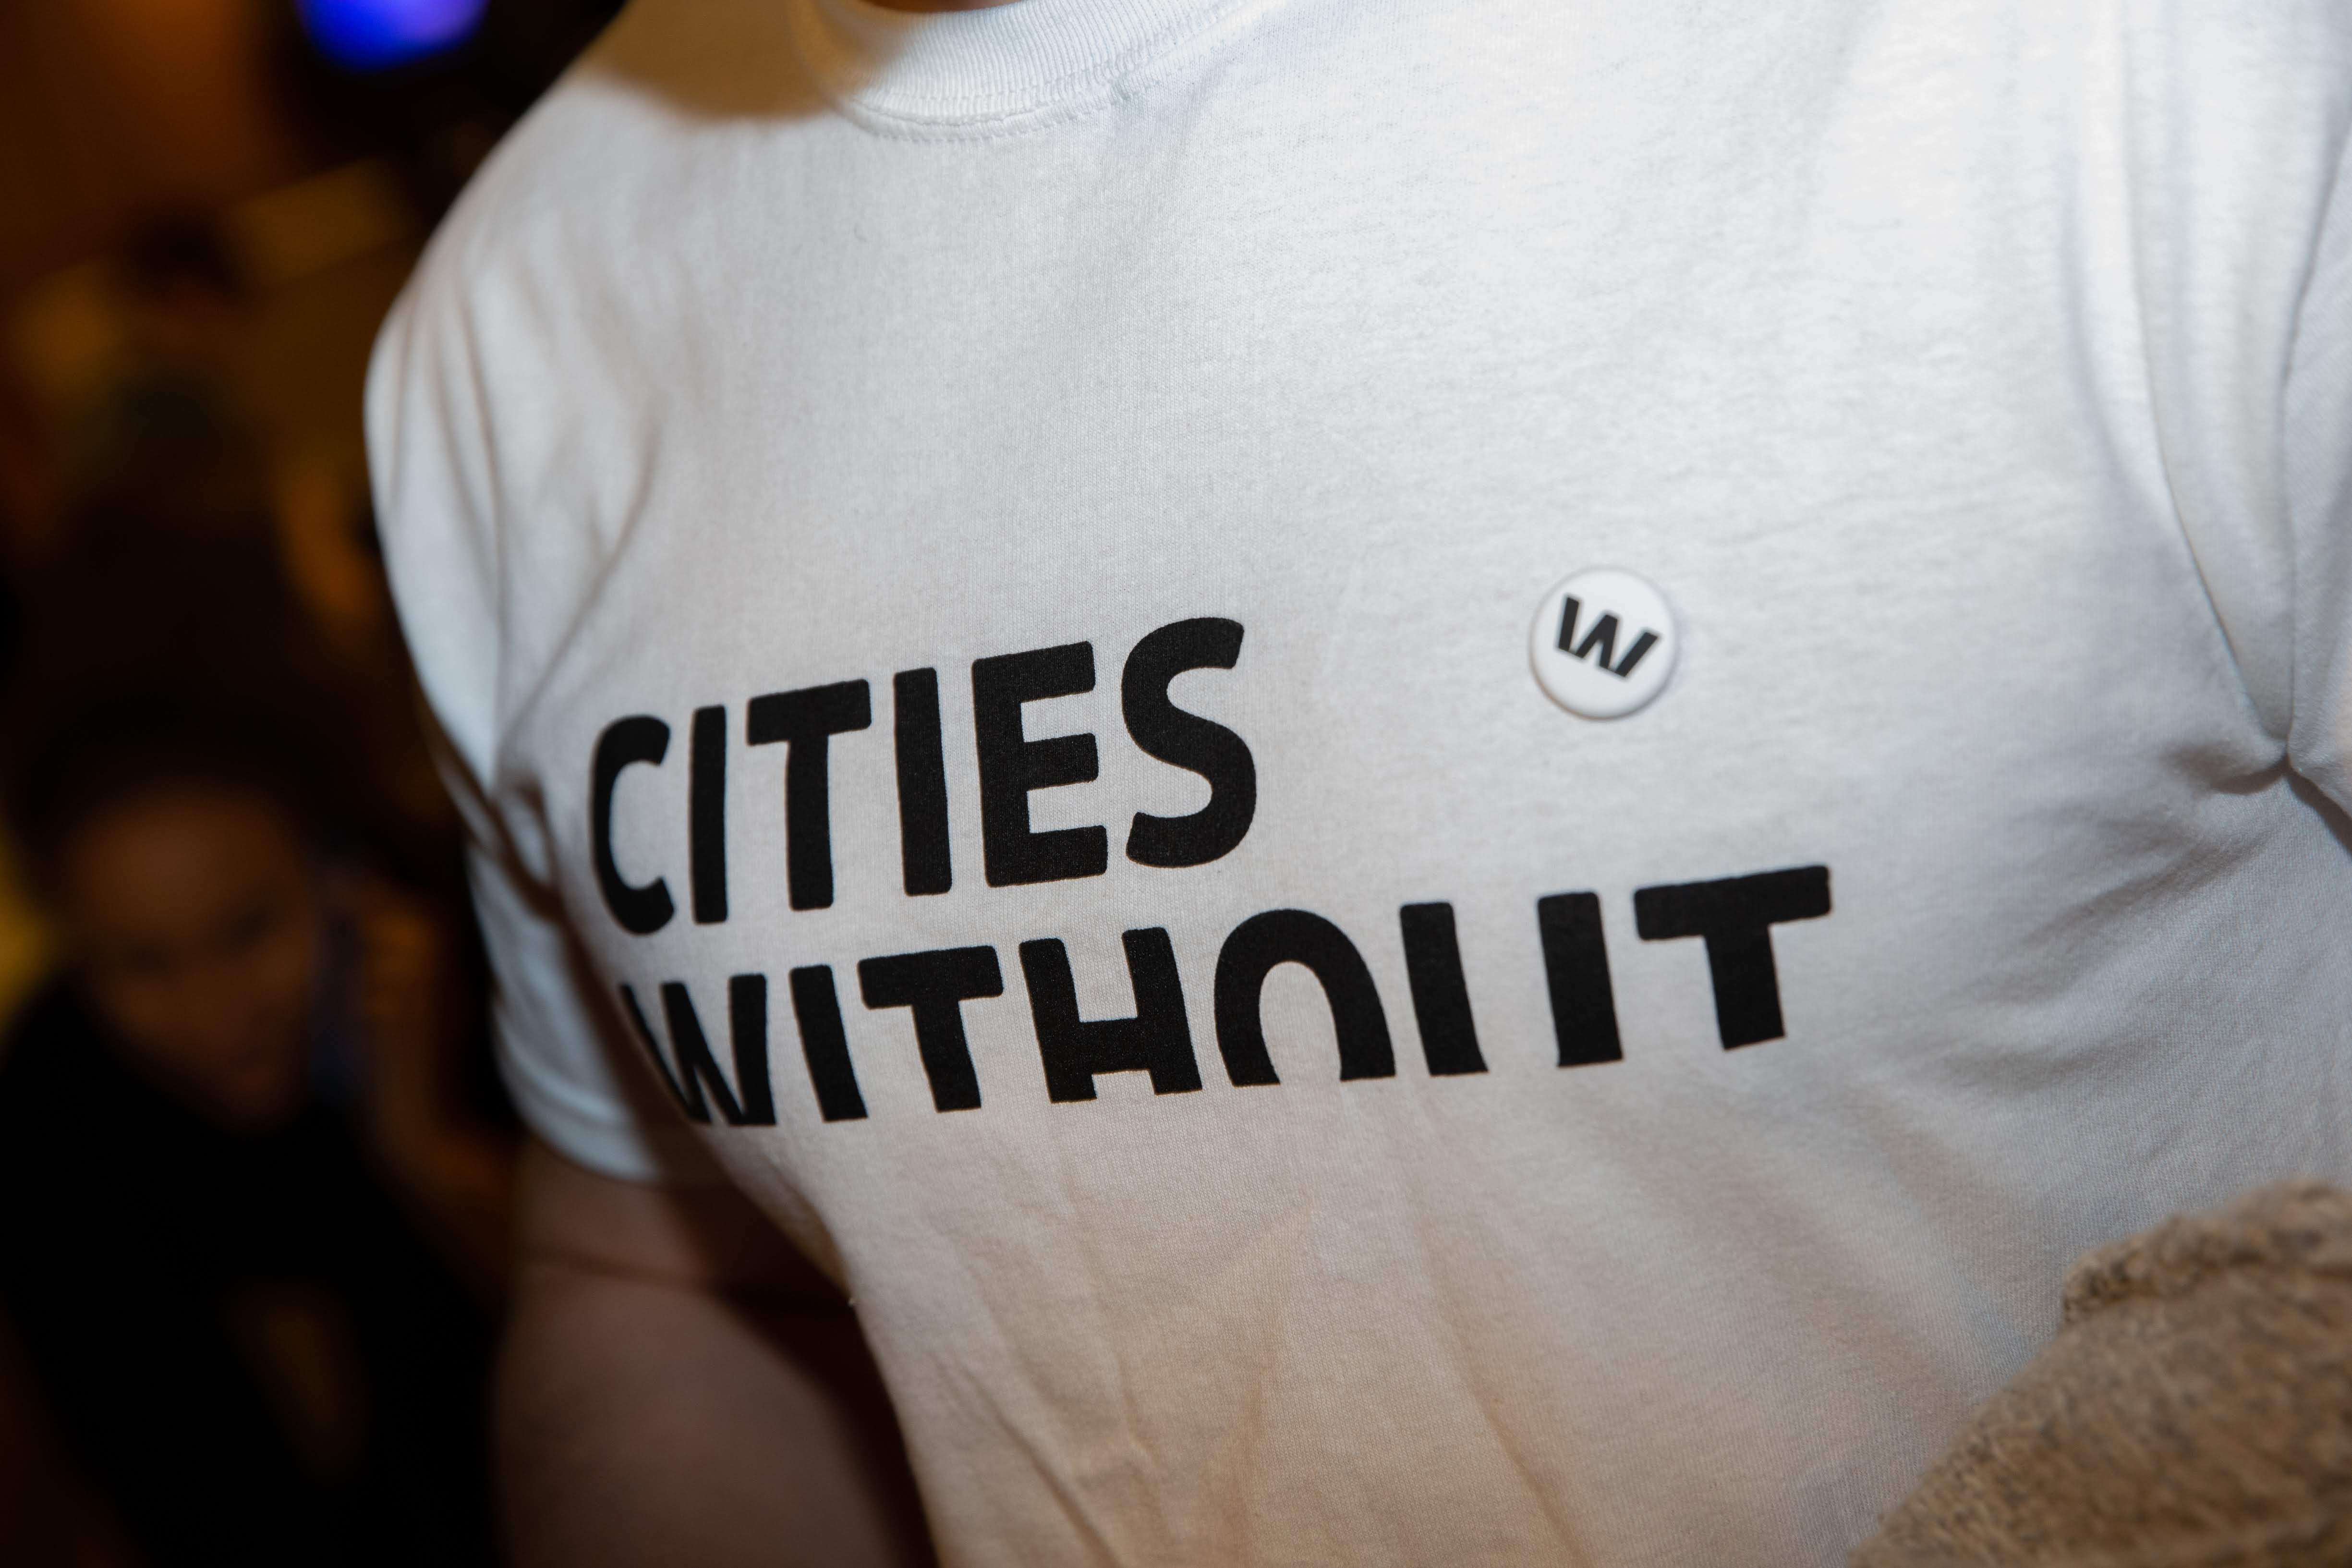 A T-shirt with the print "Cities Without"